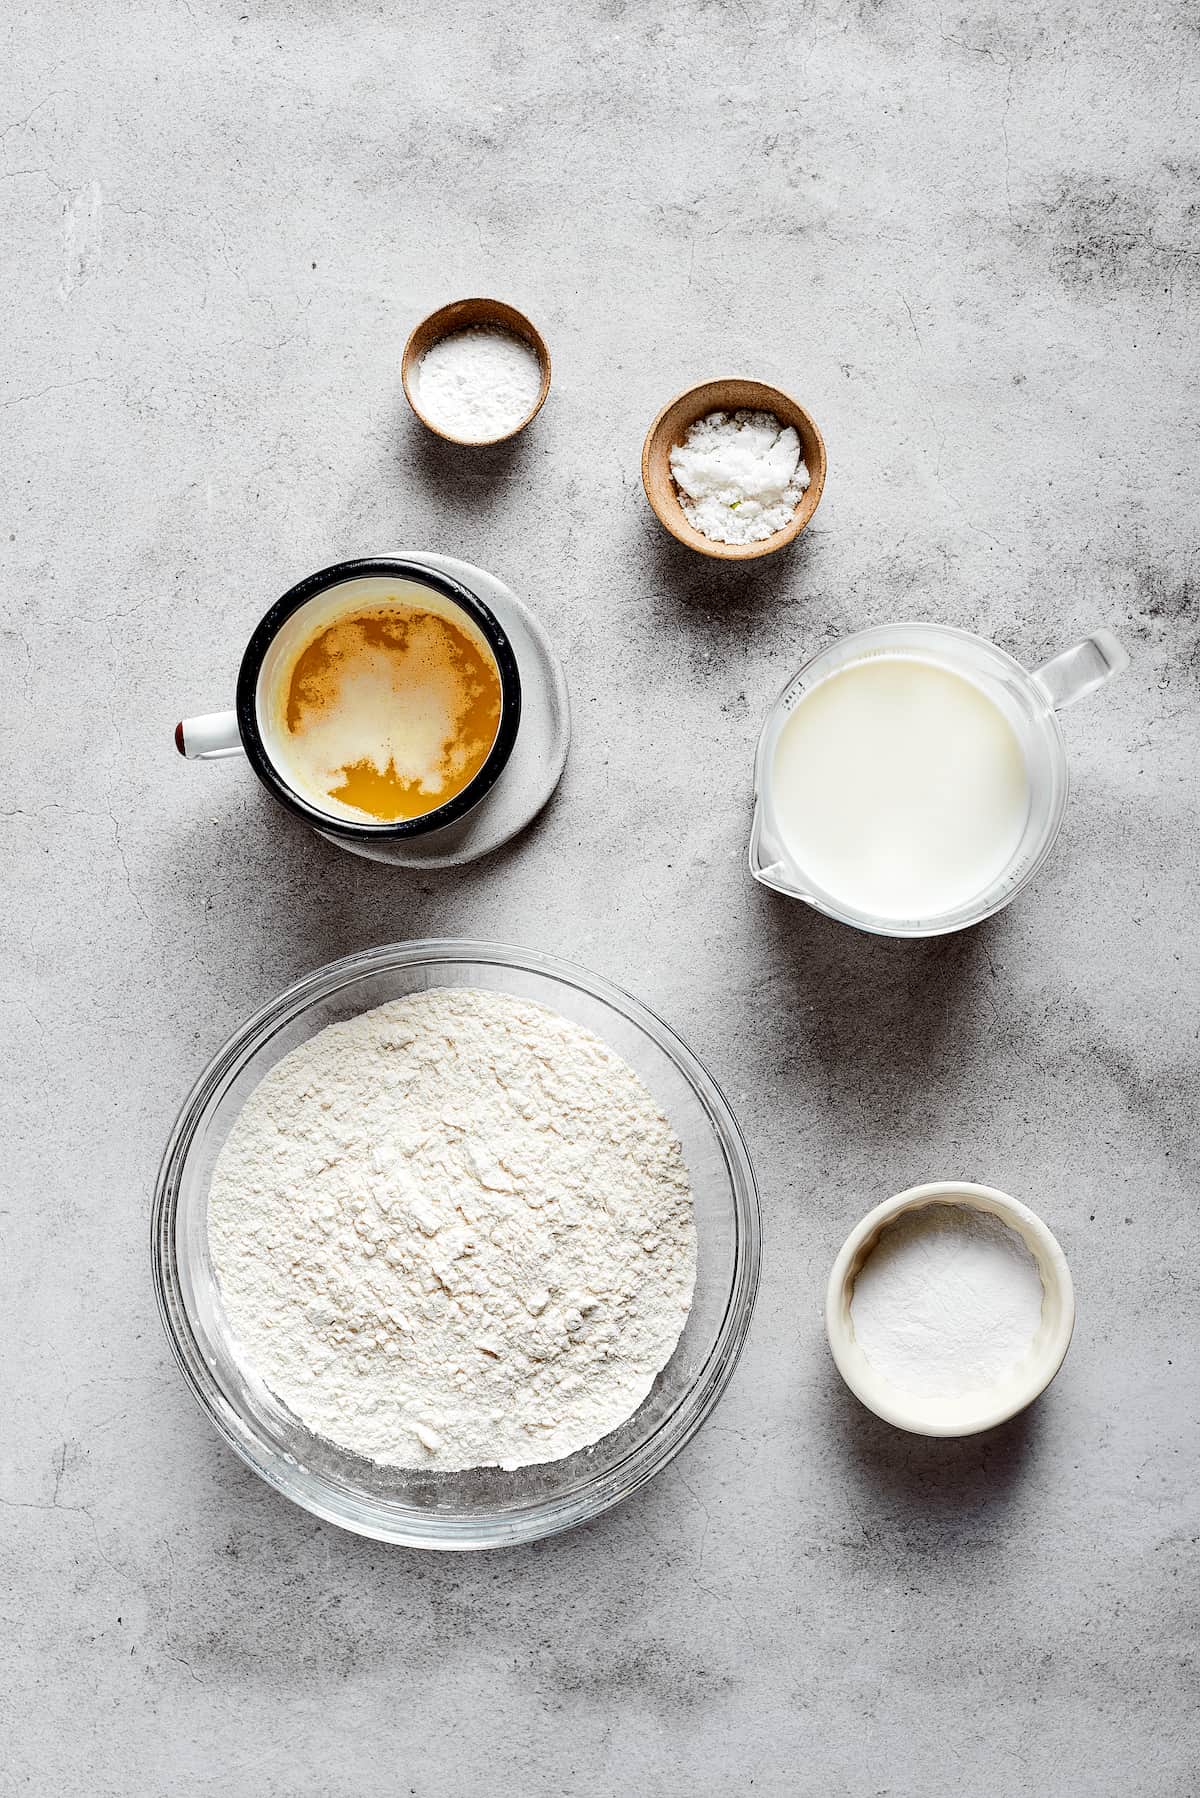 Overhead view of the ingredients needed for butter swim biscuits: a bowl of flour, a cup of melted butter, a pyrex of buttermilk, a bowl of sugar, a bowl of salt, and a bowl of baking powder